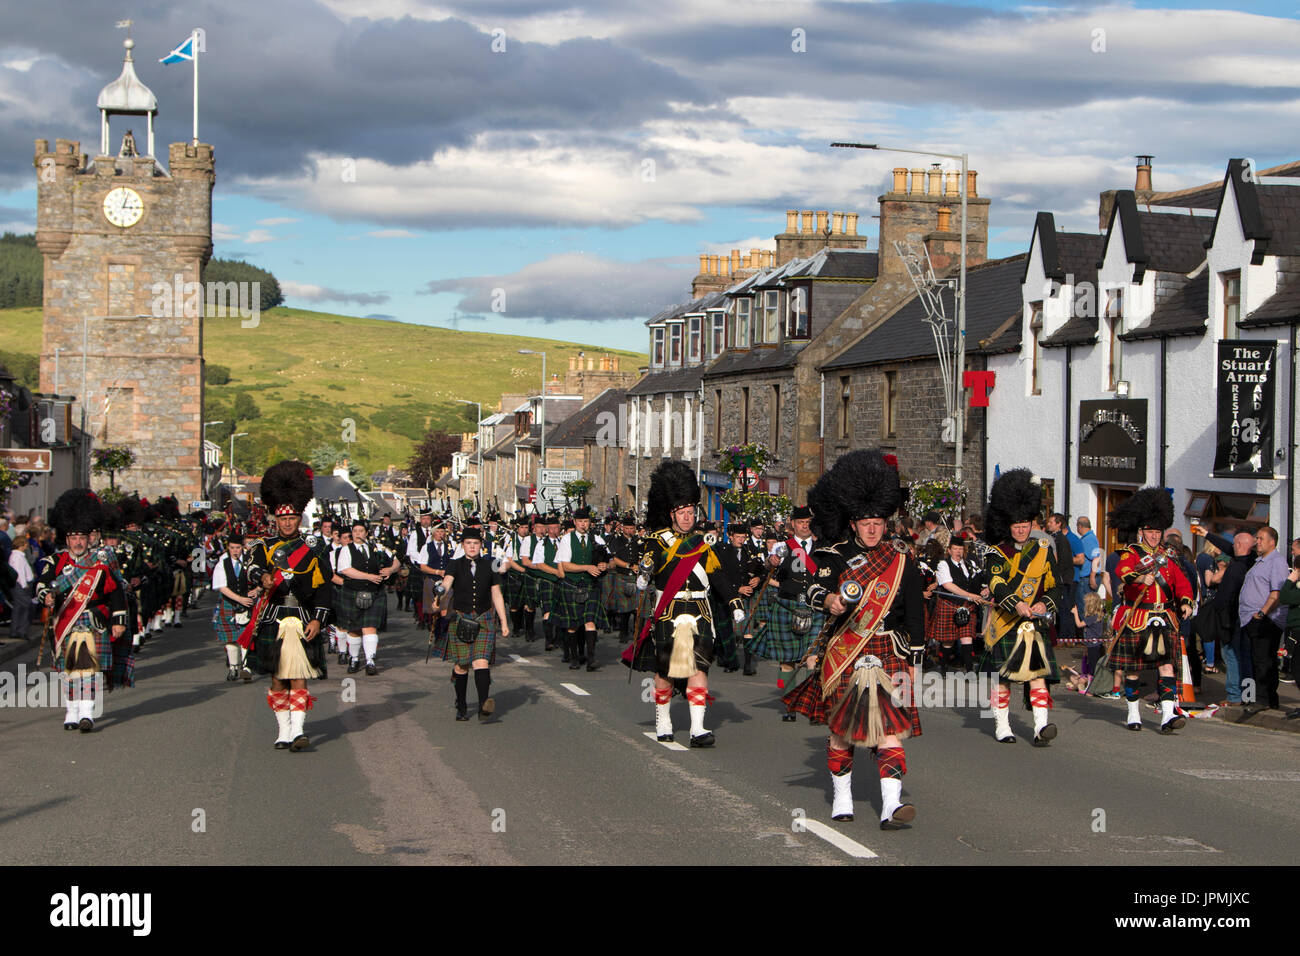 Dufftown, Scotland - Jul 31, 2017: Massed pipe bands display 'beating the retreat' in the town after the 2017 Highland Games in Dufftown, Scotland. Stock Photo